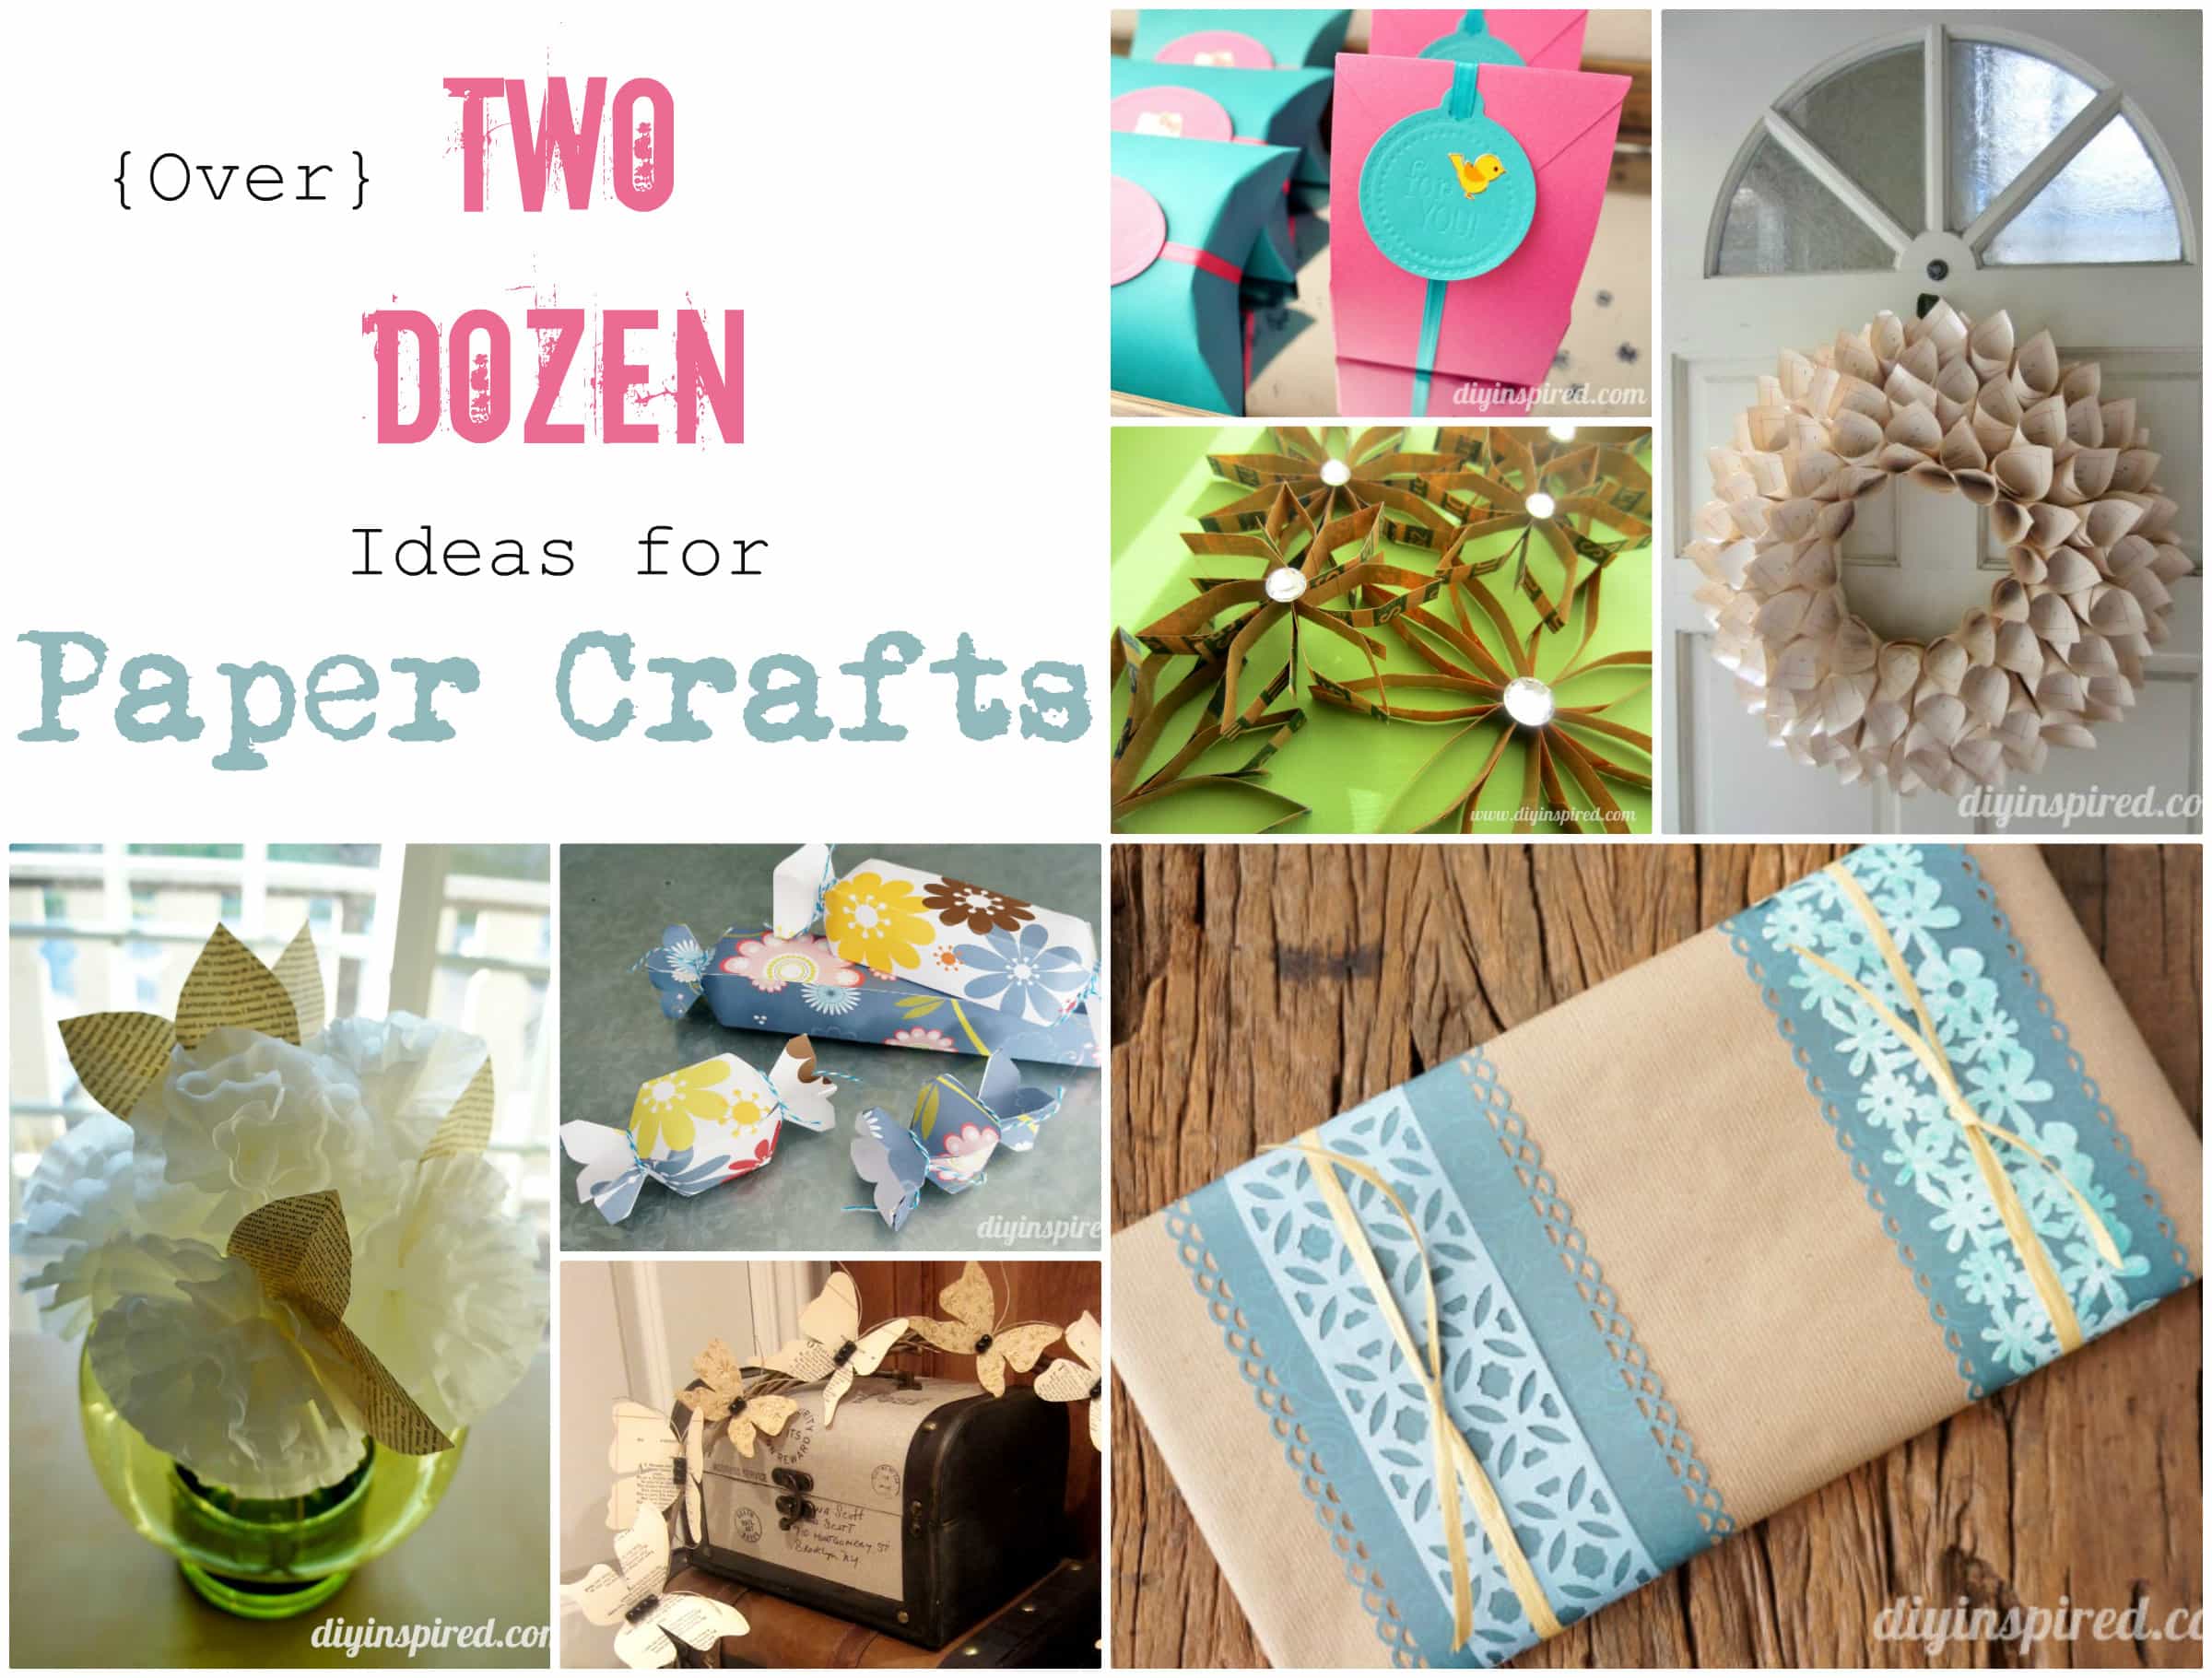 Over Two Dozen Ideas for Paper Crafts